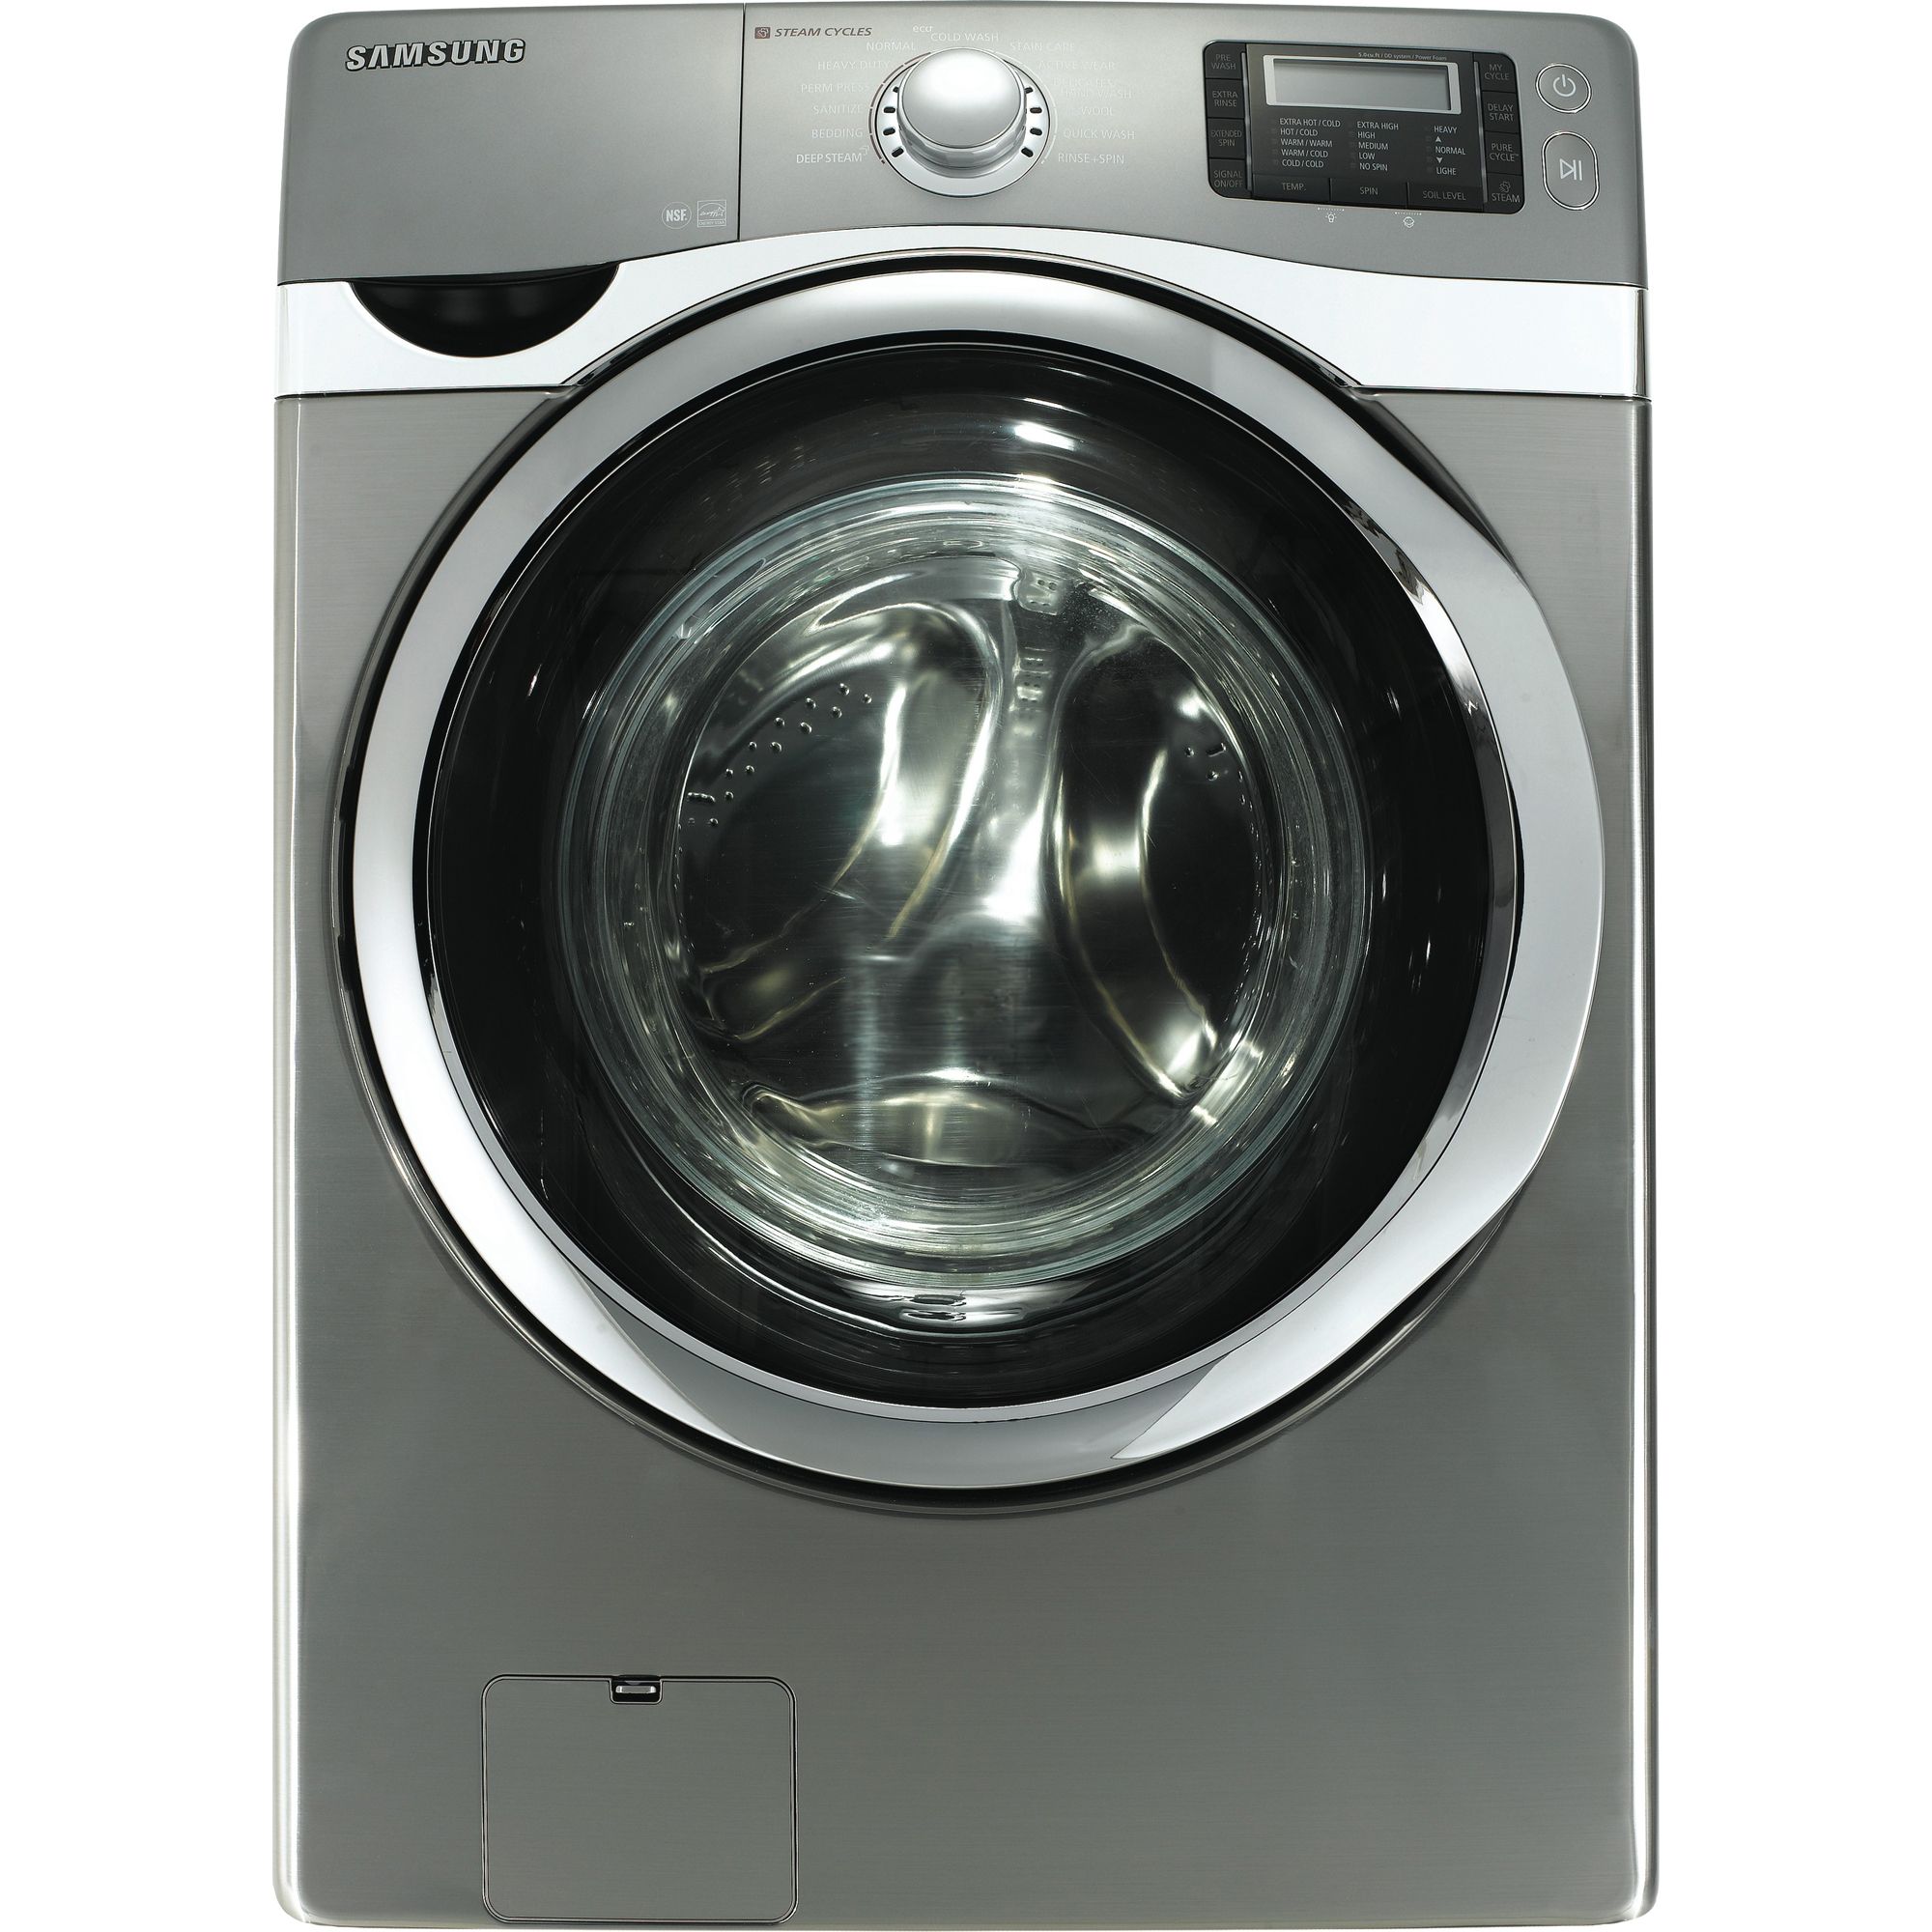 Samsung 4.3 cu. ft. High-Efficiency Front-Load Washer Steam, Stainless Steel (Model F520ABH)